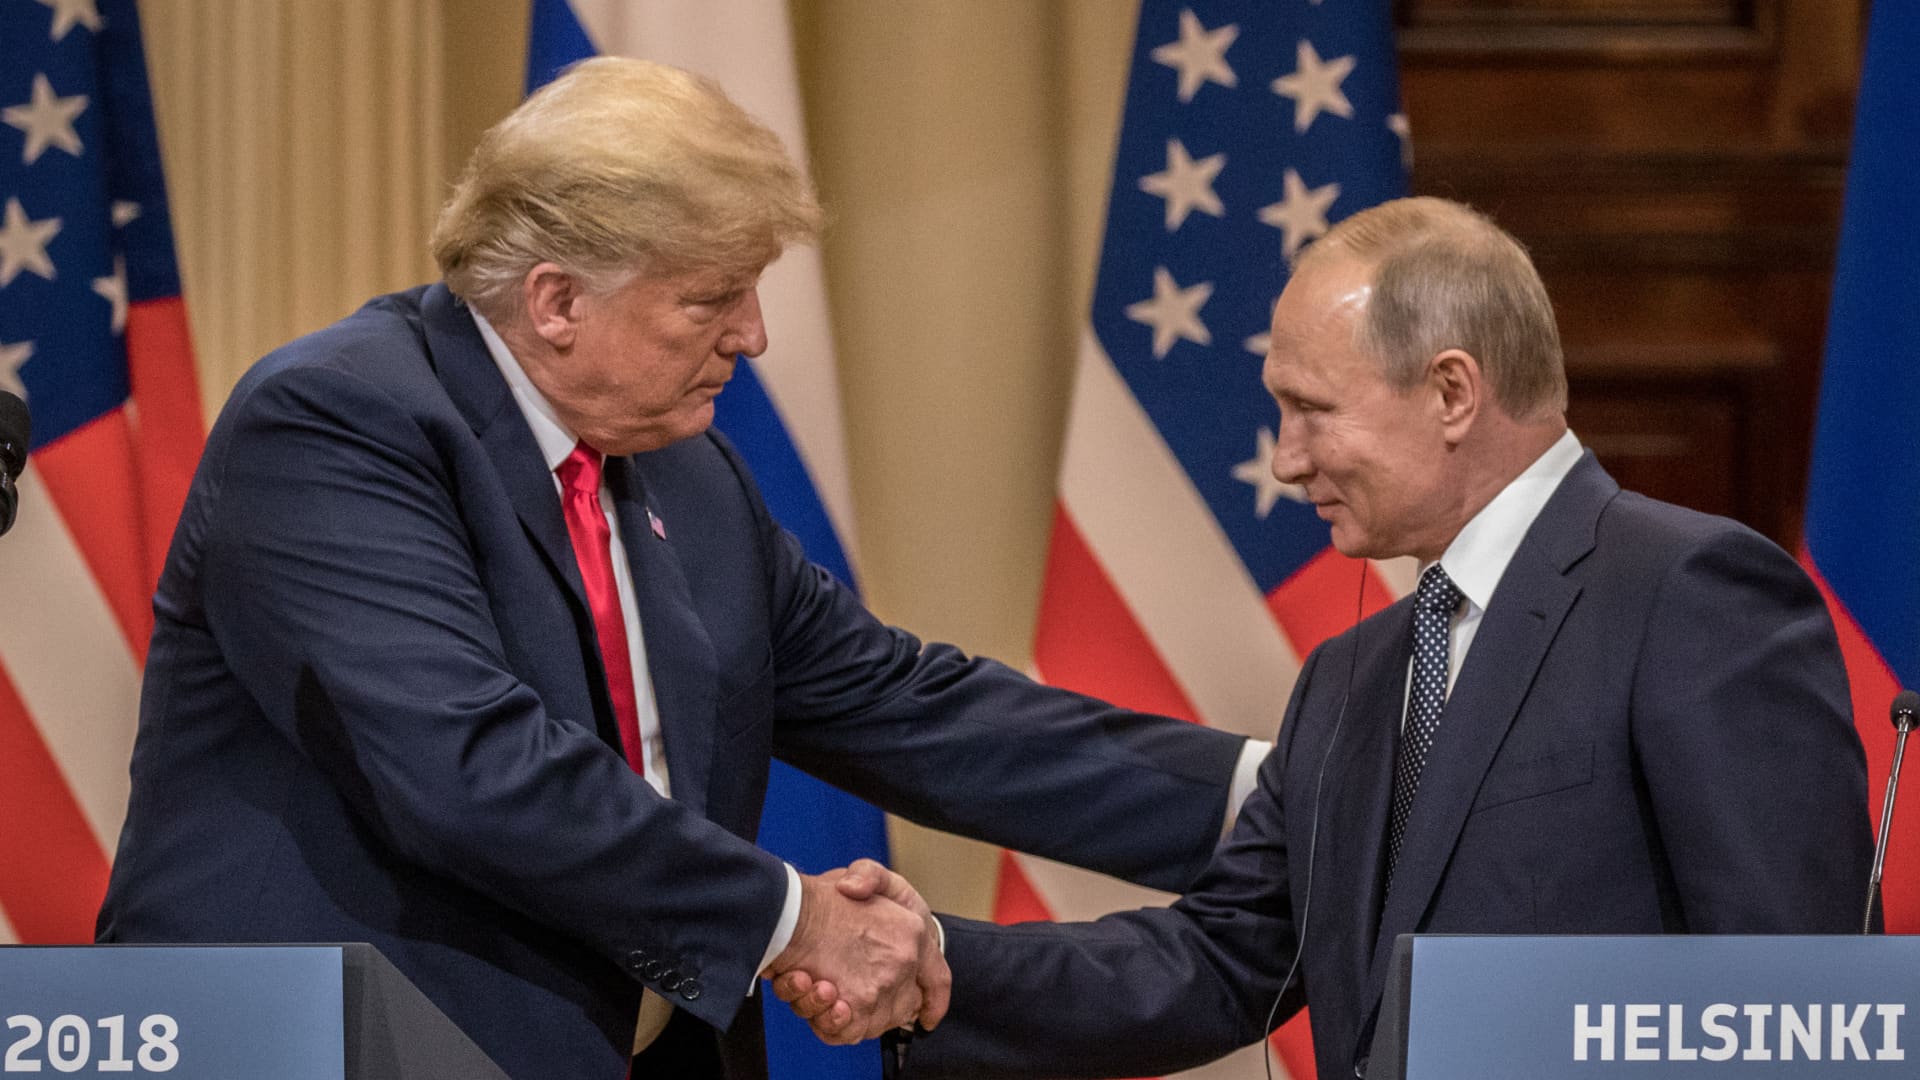 Then President Donald Trump and Russian President Vladimir Putin at a joint press conference after their summit on July 16, 2018, in Helsinki, Finland.